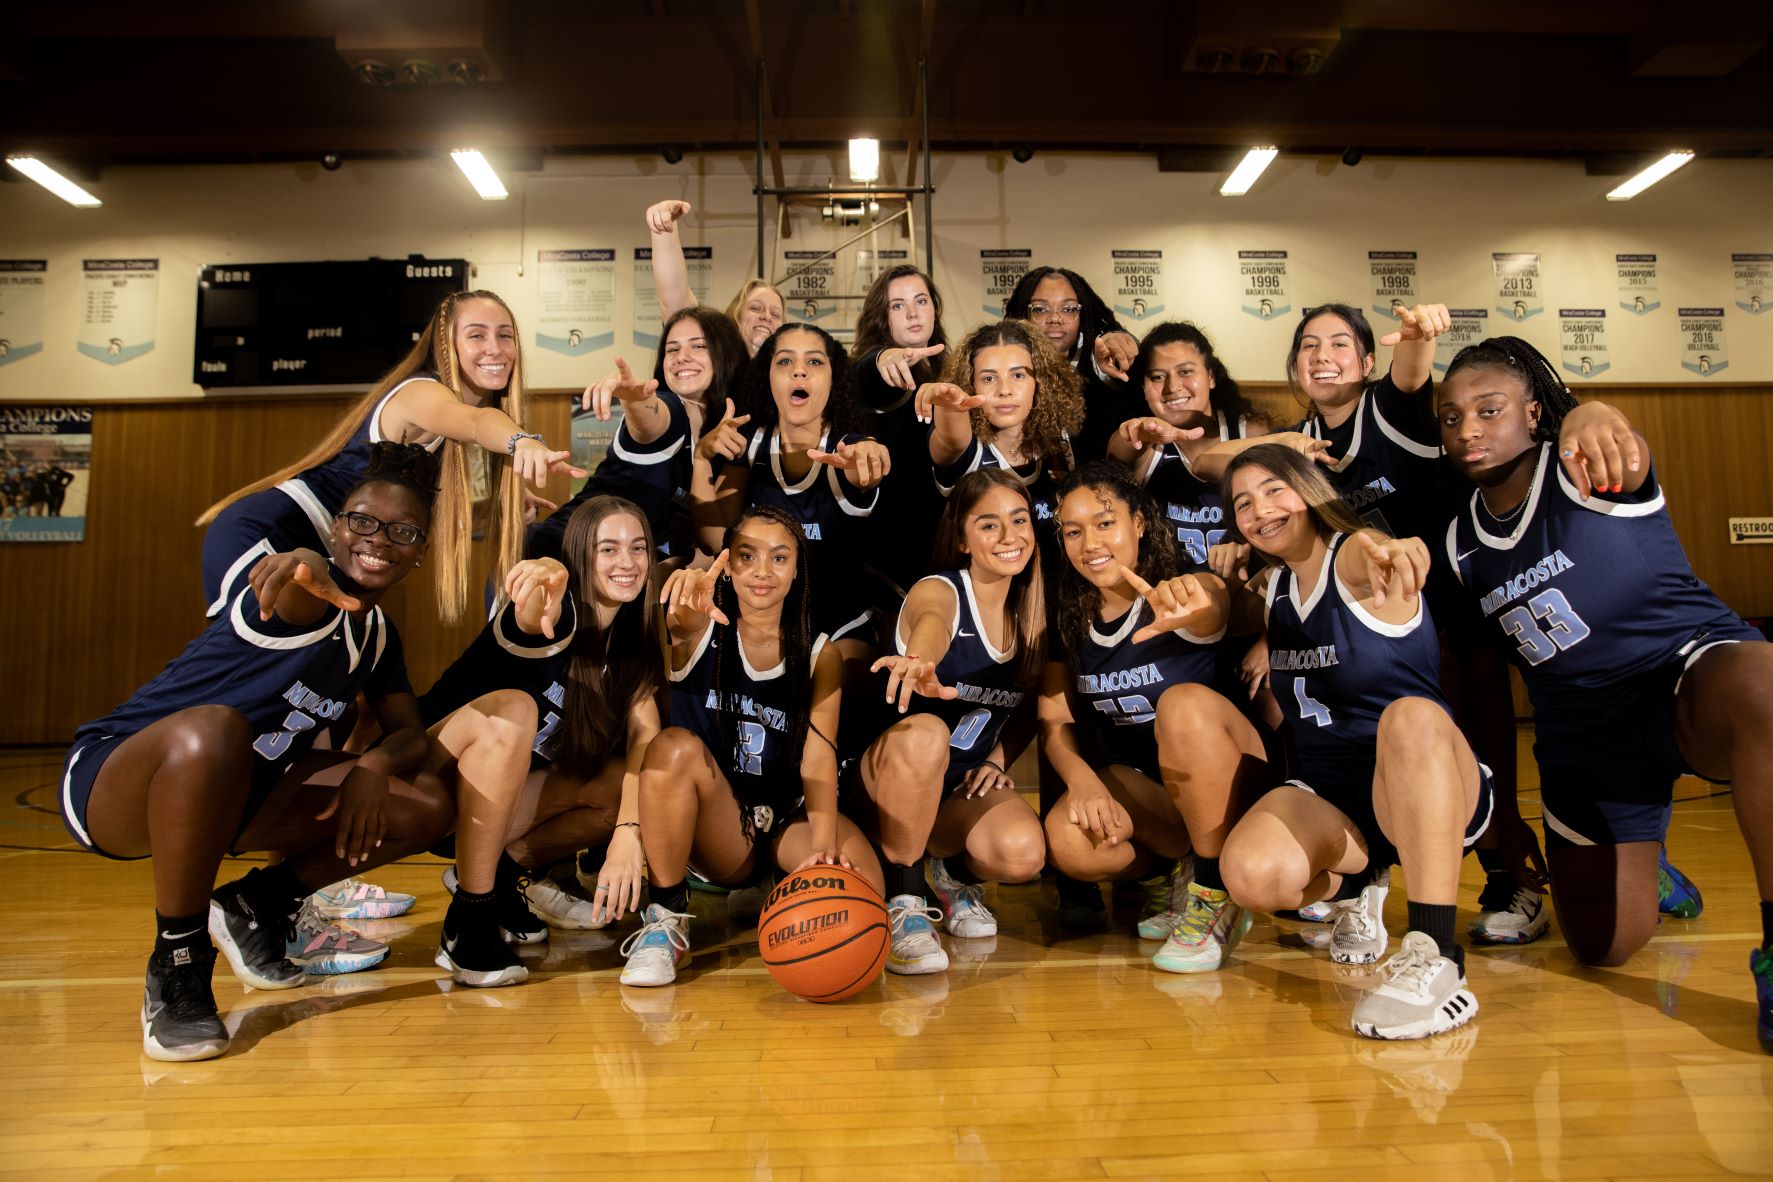 MiraCosta women's basketball team picture.